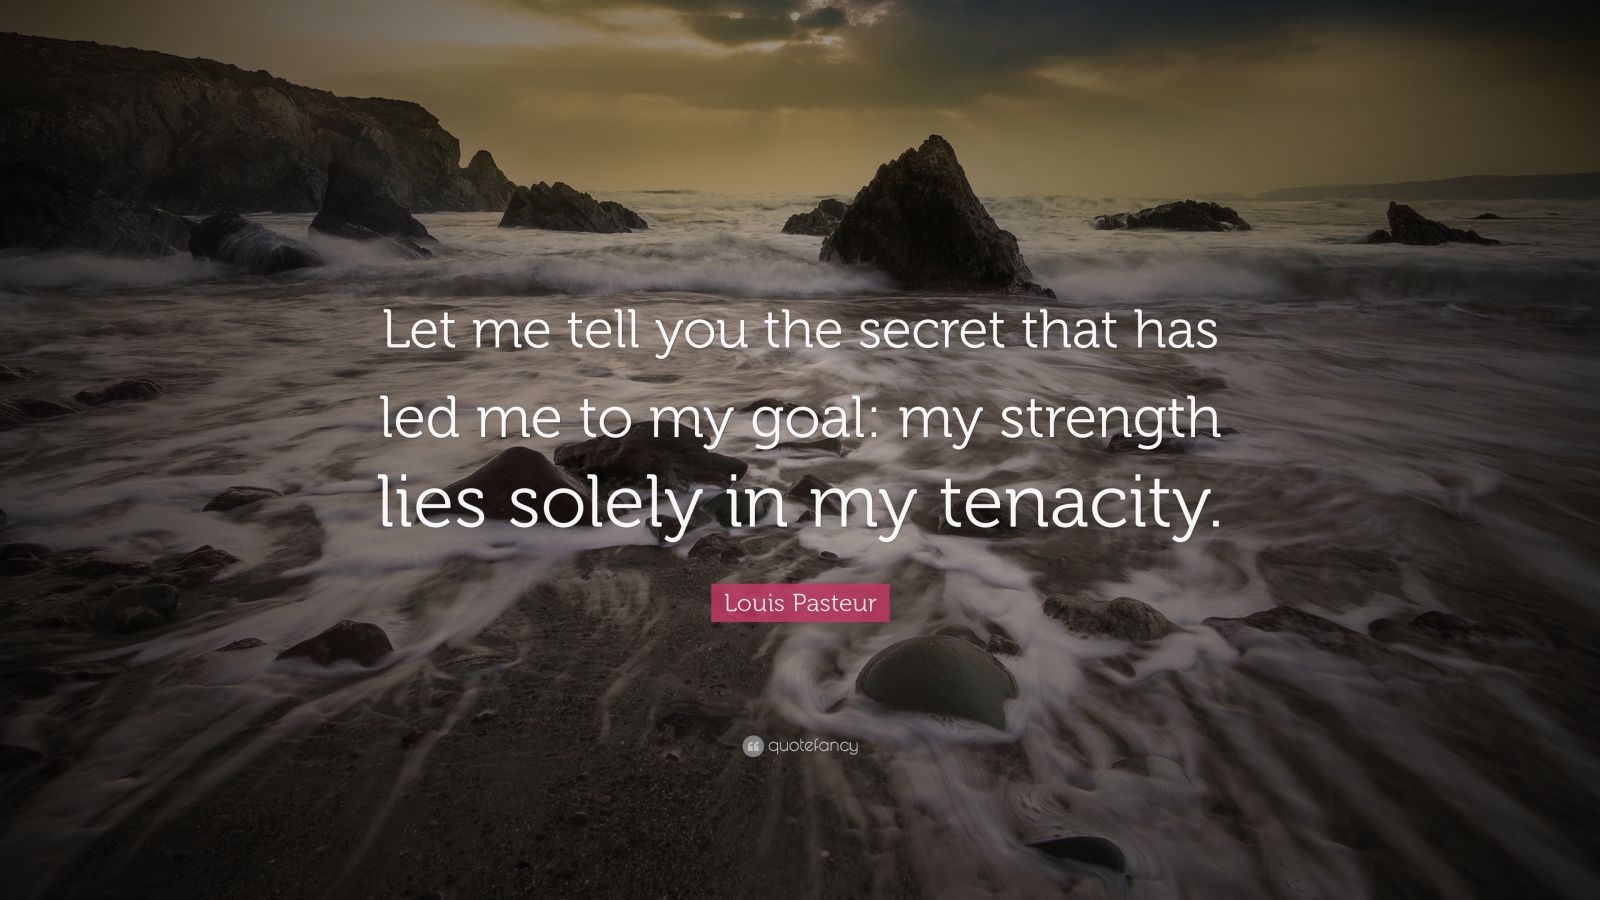 Louis Pasteur Quote: “Let me tell you the secret that has led me to my